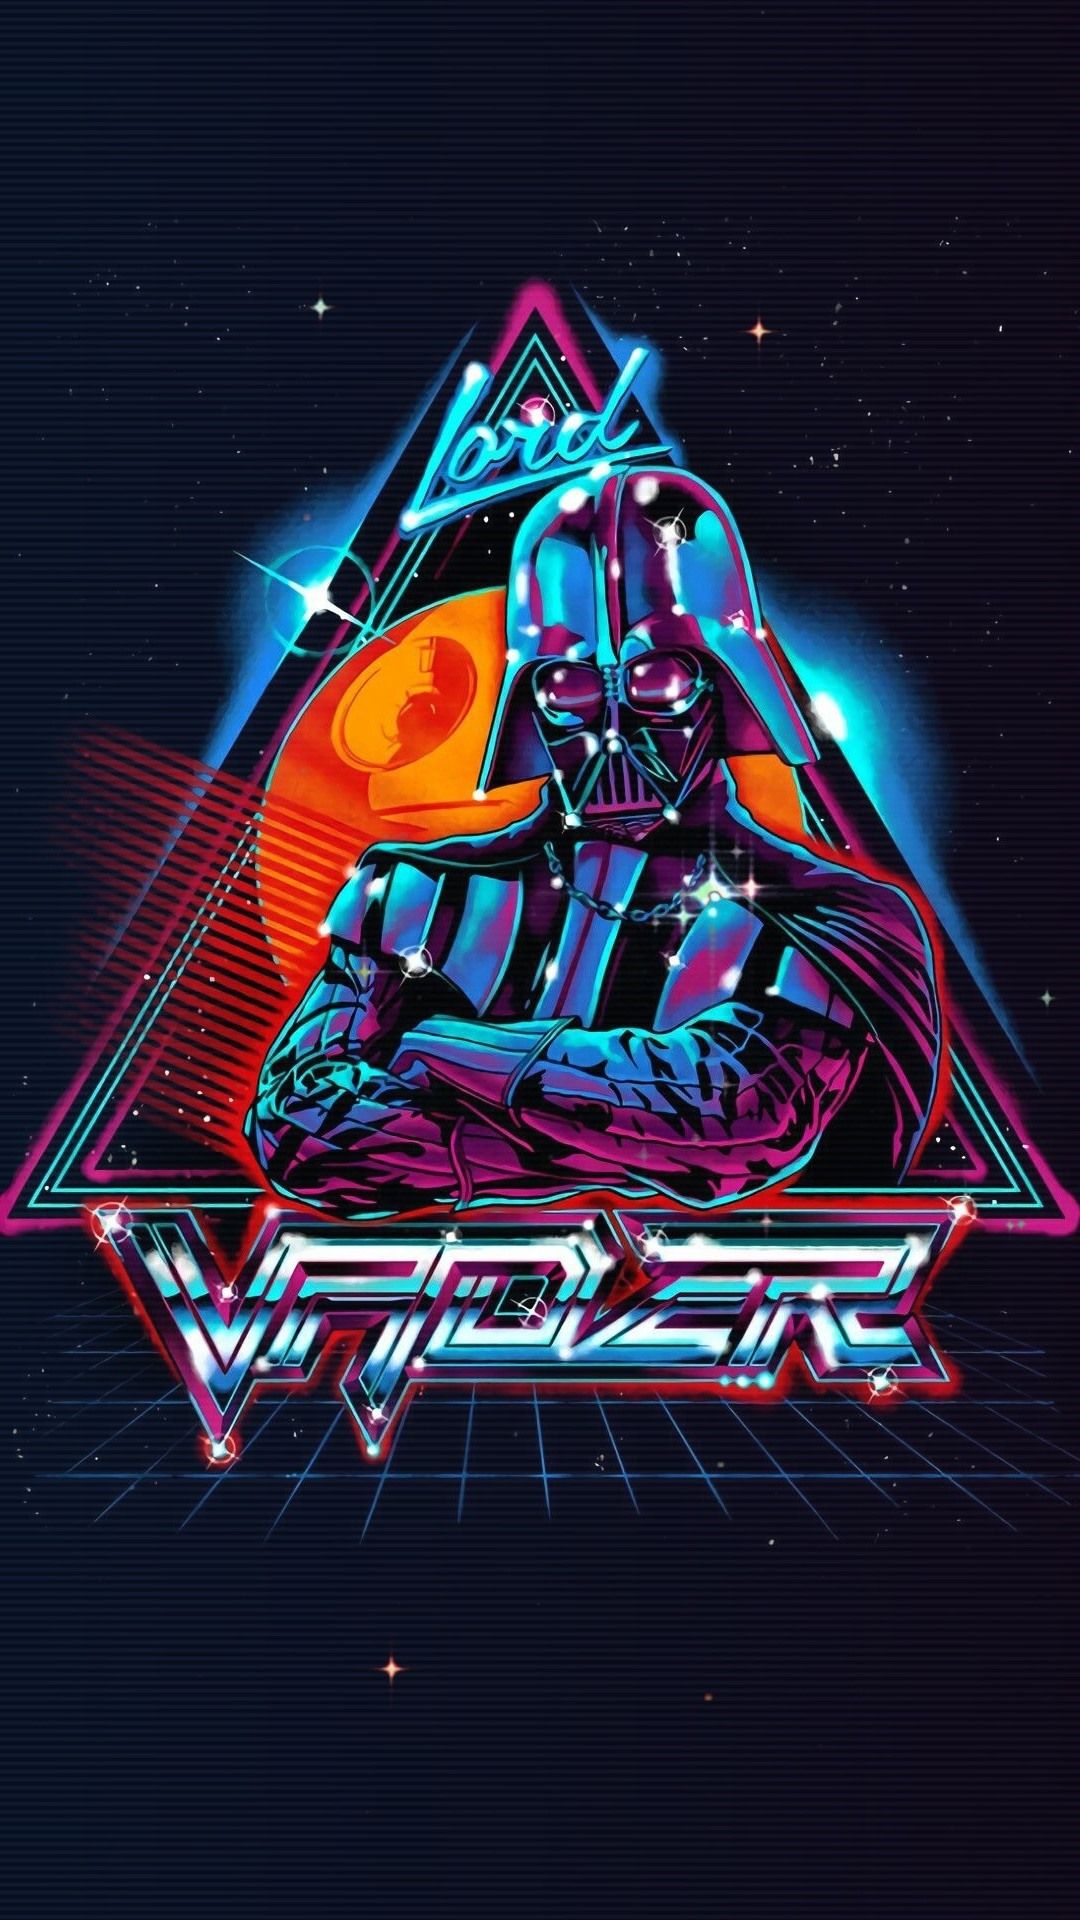 Star Wars, Darth Vader, Art Picture, Black Background 1080x1920 IPhone 8 7 6 6S Plus Wallpaper, Background, Picture, Image